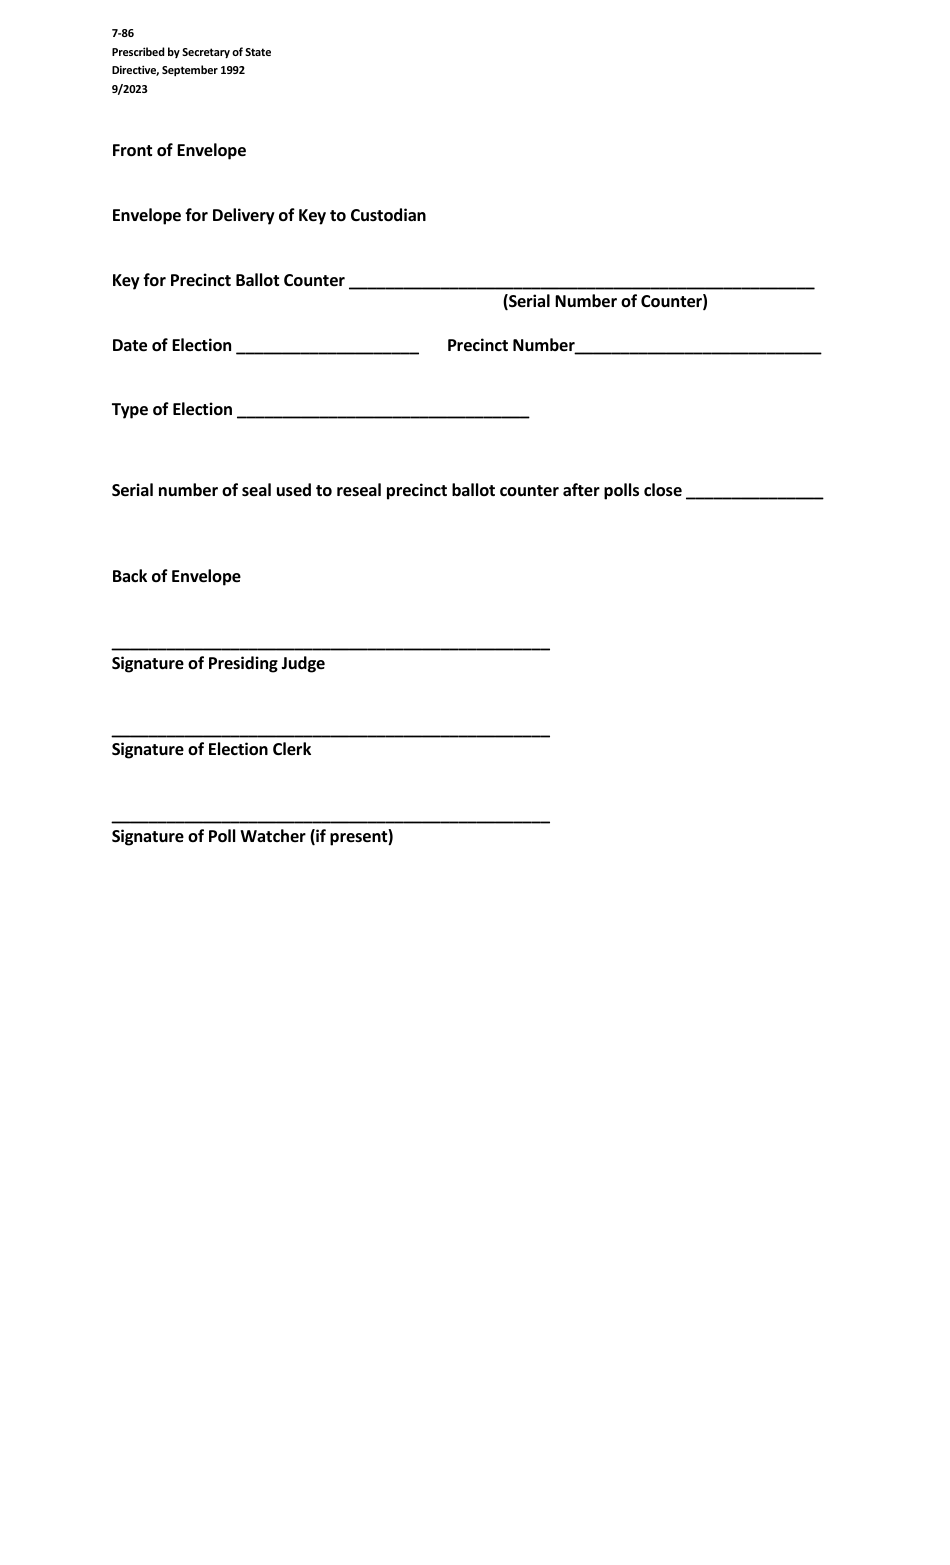 Form 7-86 Envelope for Delivery of Key to Custodian - Texas, Page 1